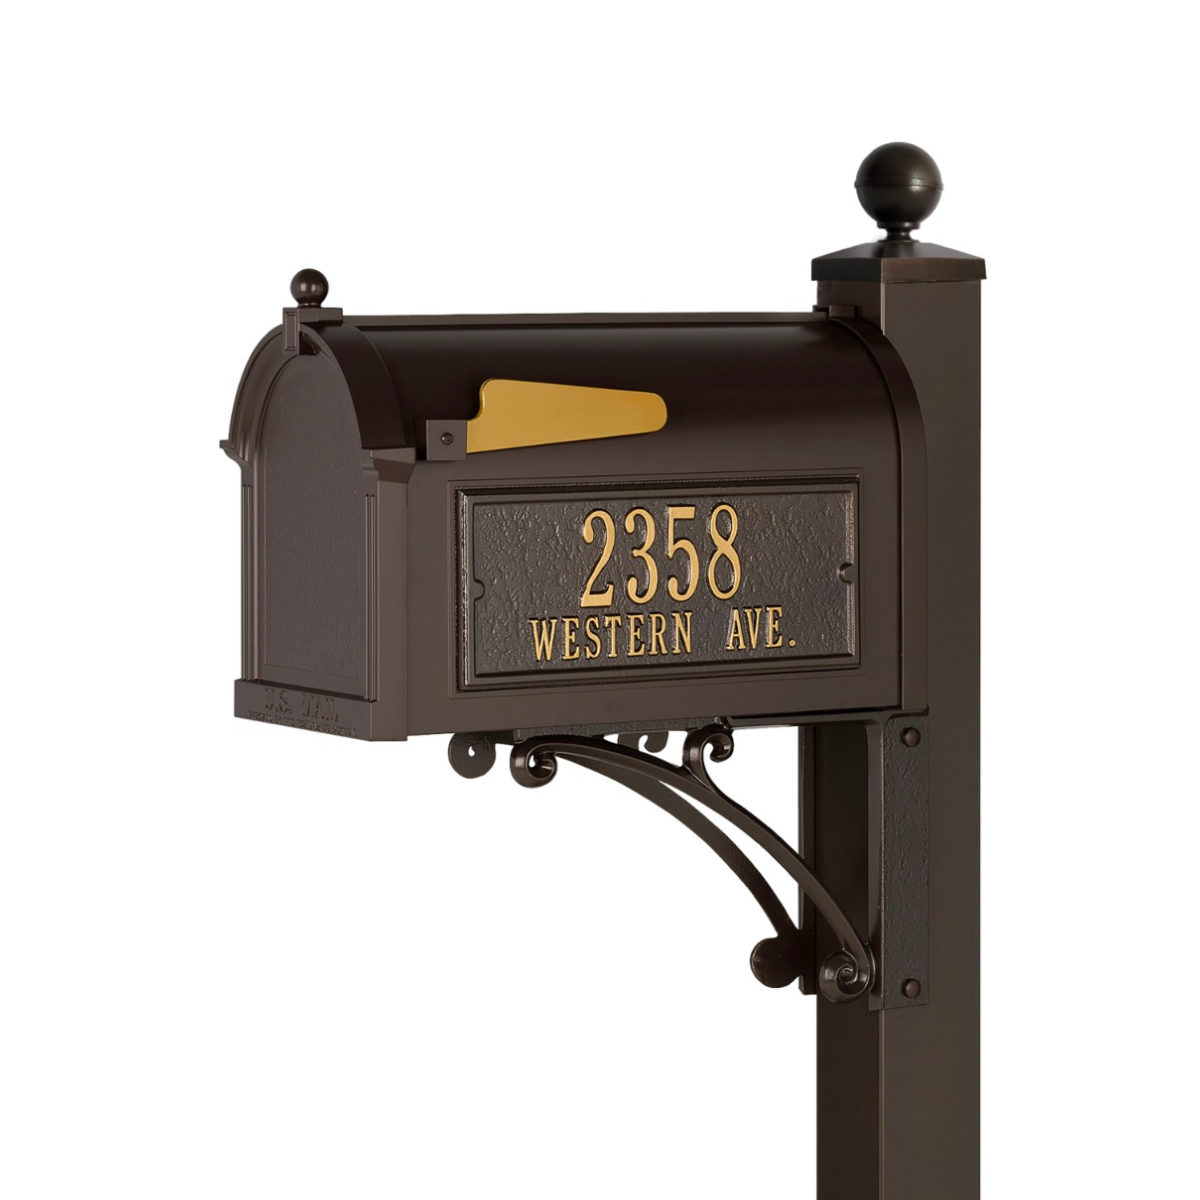 Whitehall Custom Capitol Mailbox and Post Package for Sale (Optional Post & Accessories) Featured Image